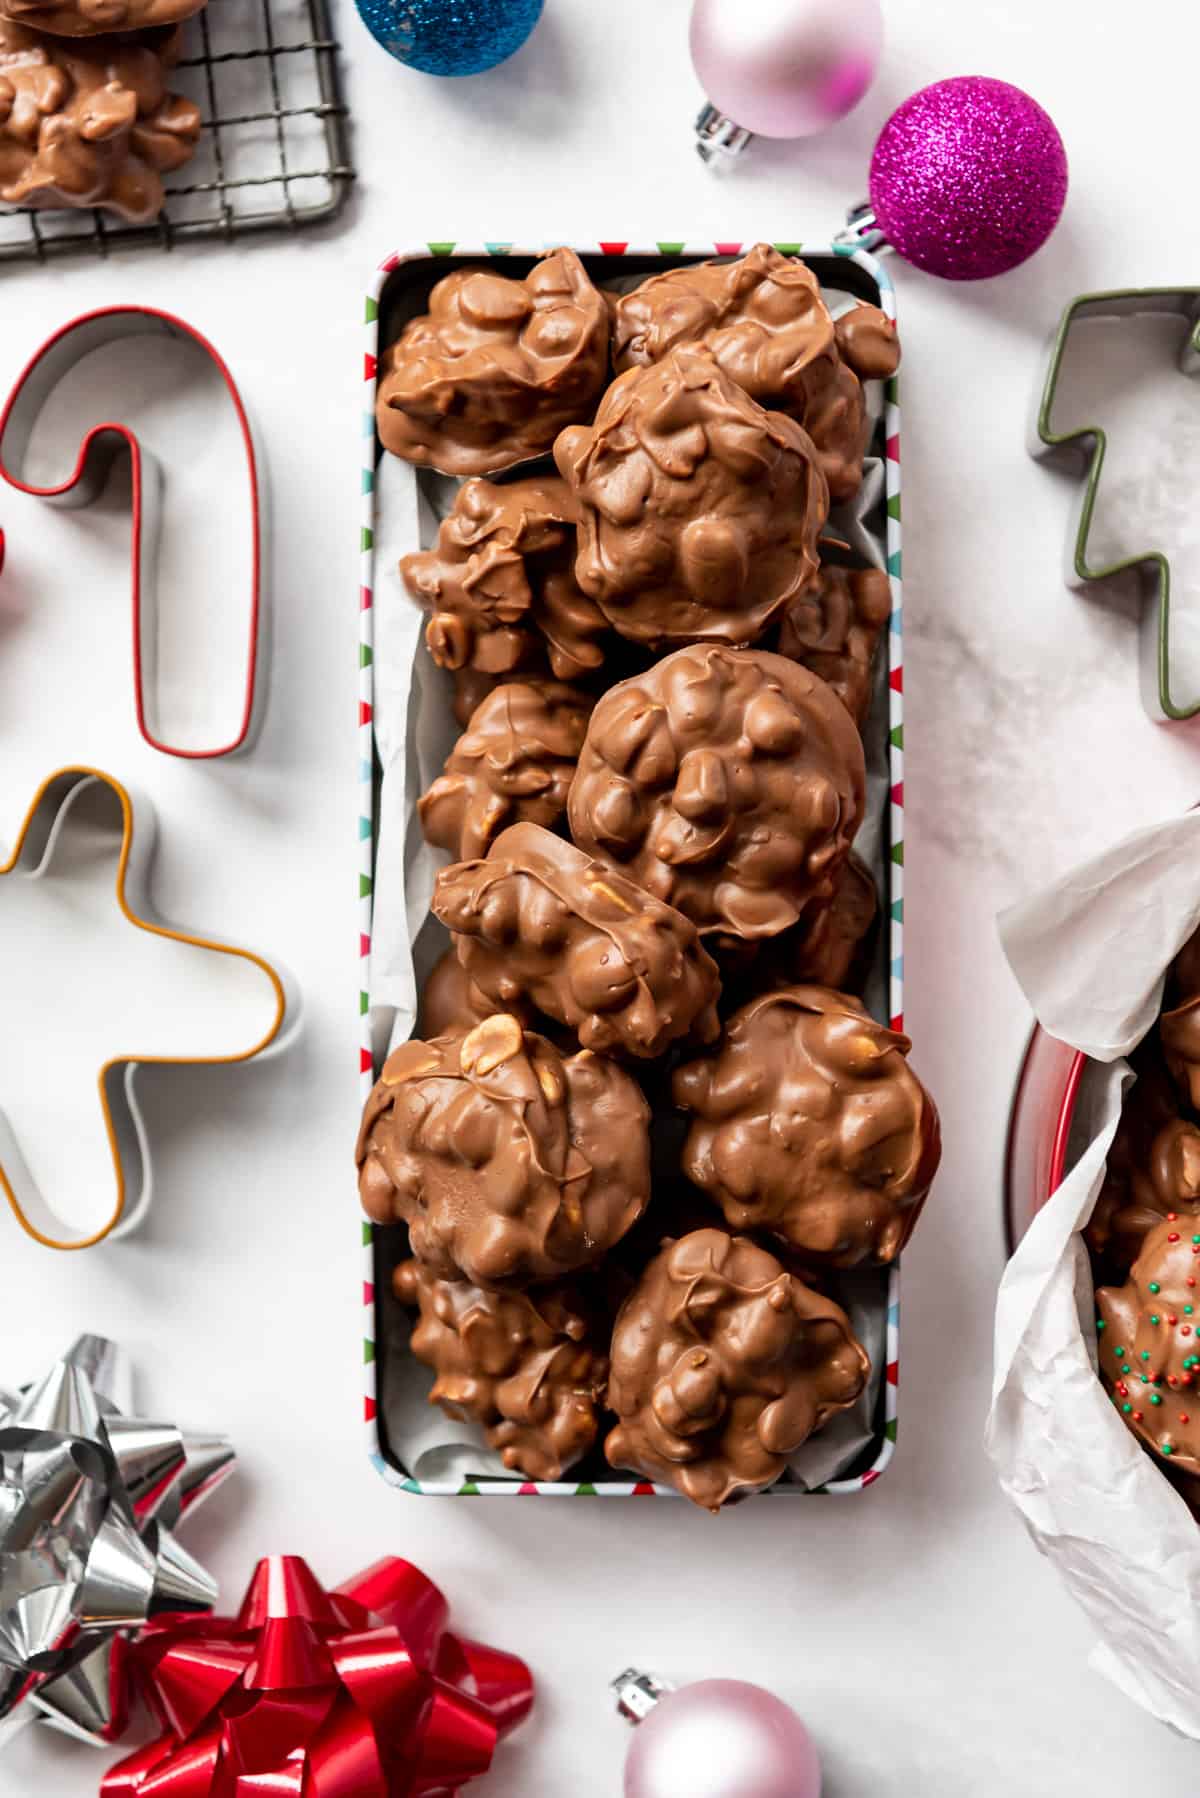 An overhead image of a rectangular tin filled with Christmas crockpot candy surrounded by ornaments, bows, and cookie cutters.